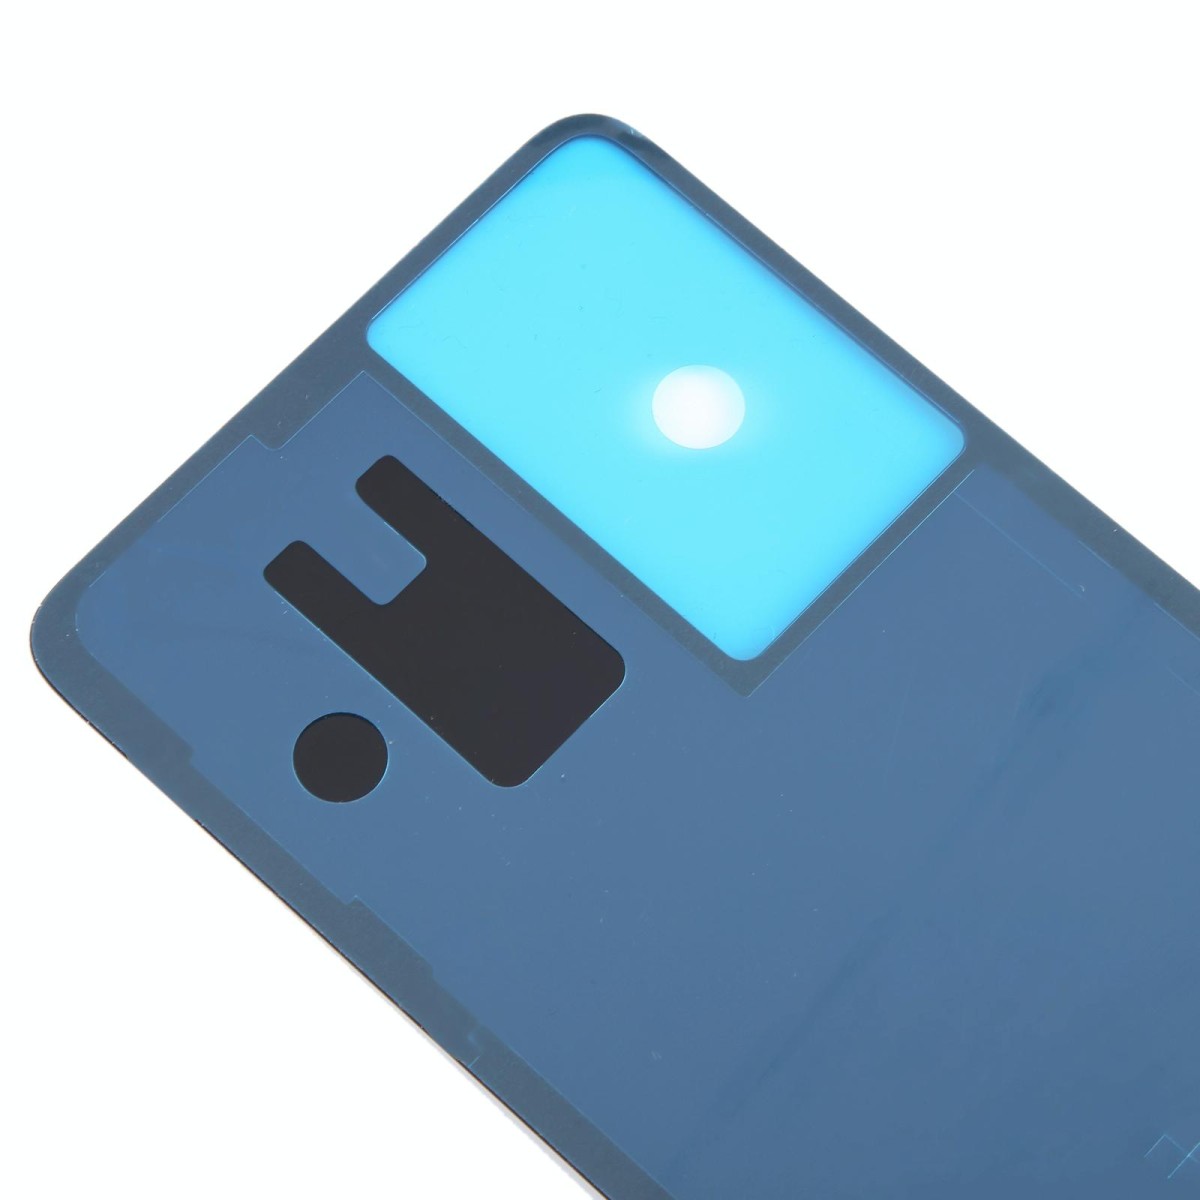 For TCL 40 NxtPaper 4G Original Battery Back Cover(Blue)